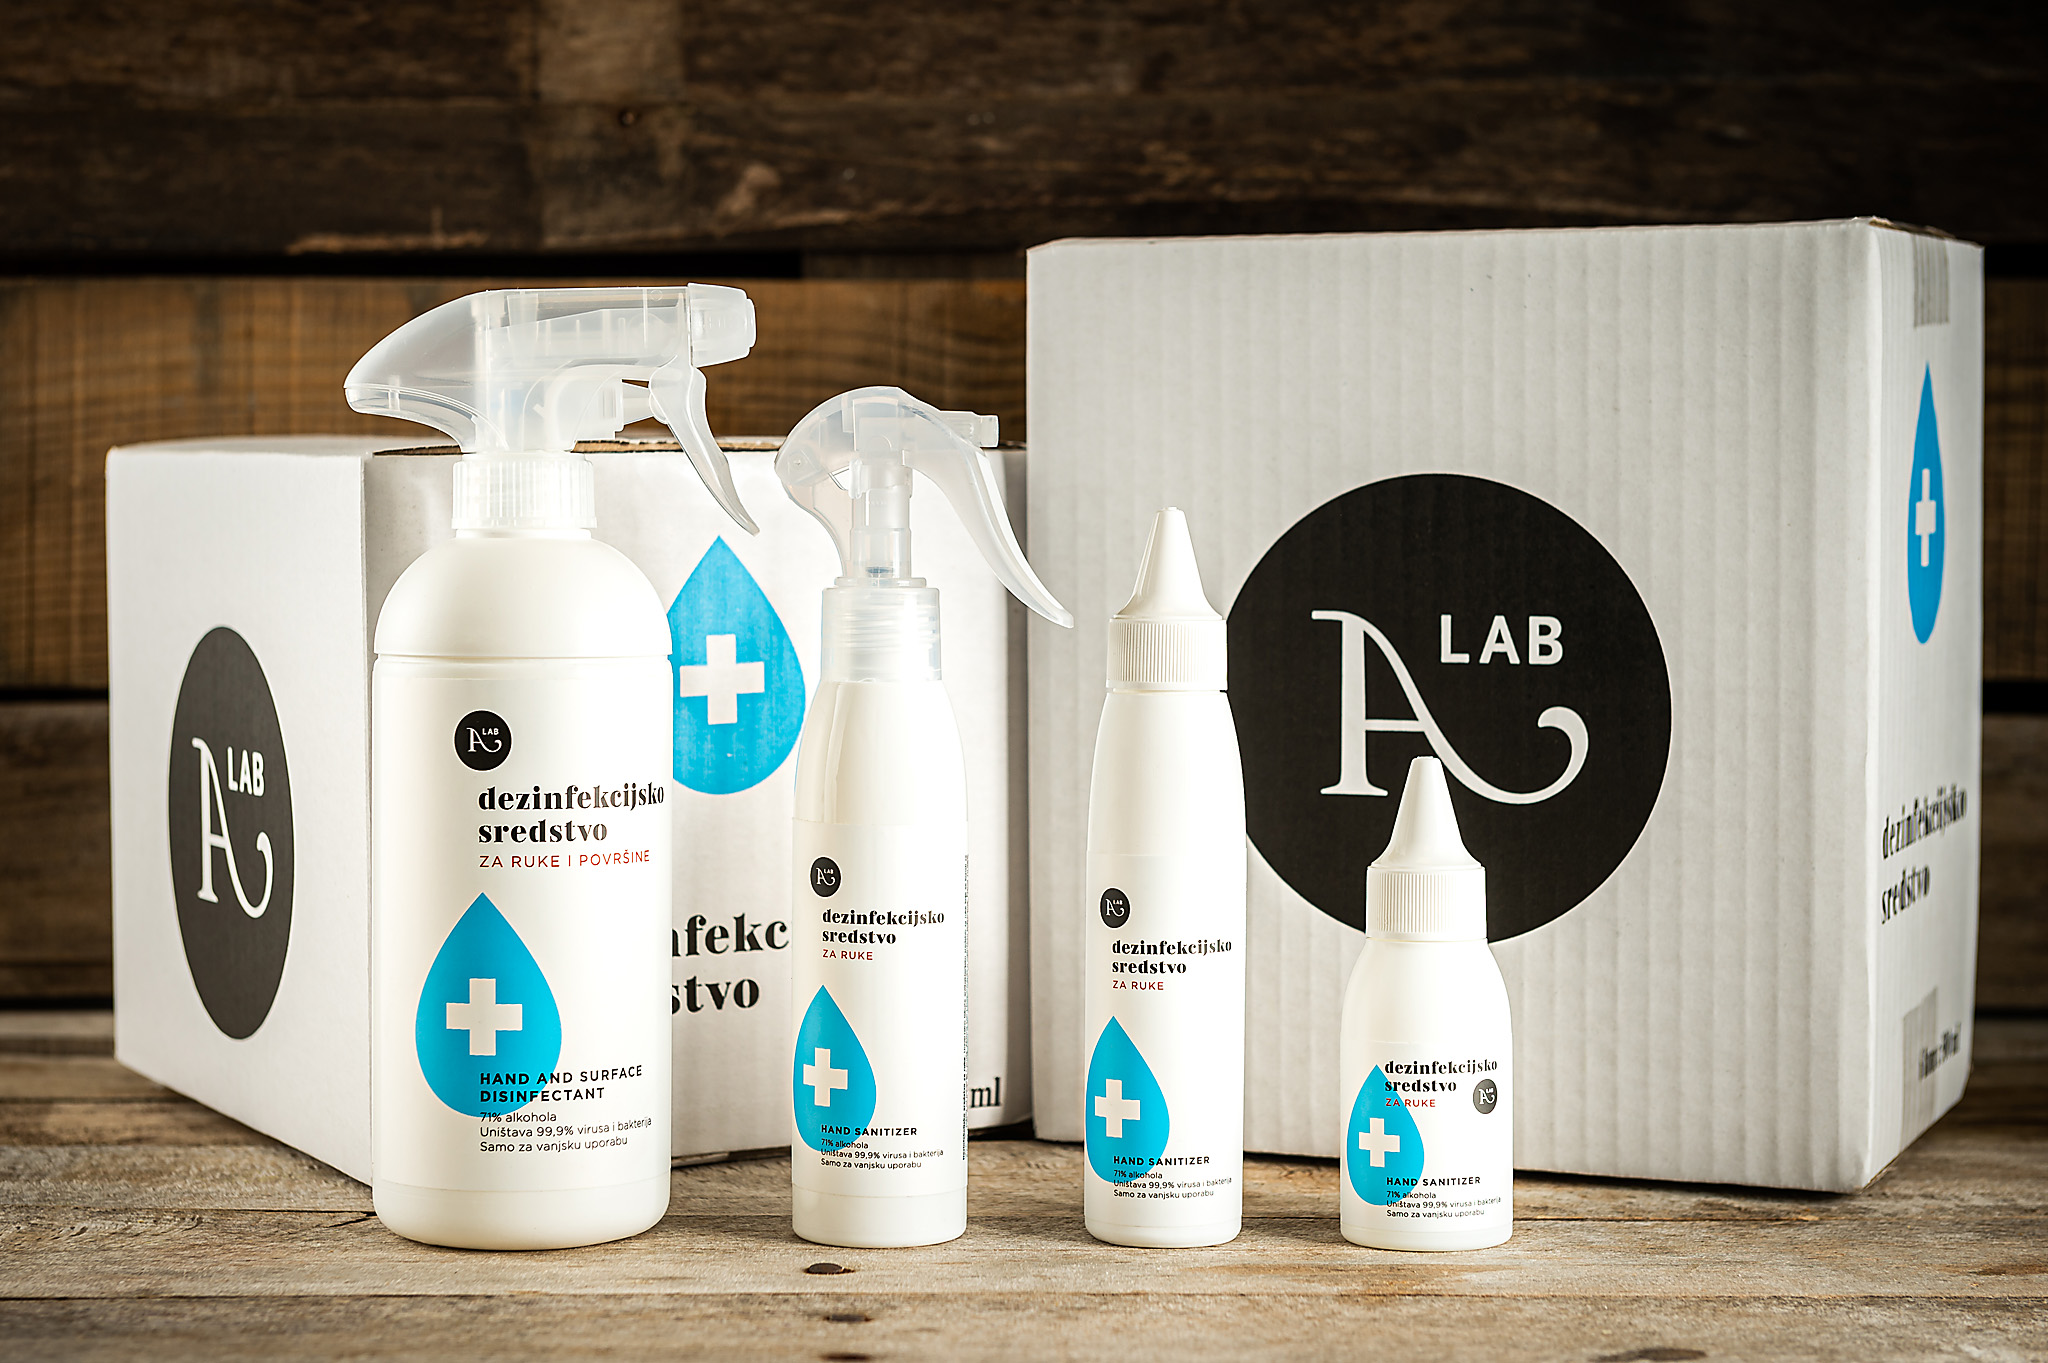 hren | plethora of creativity // A lab disinfection product photography